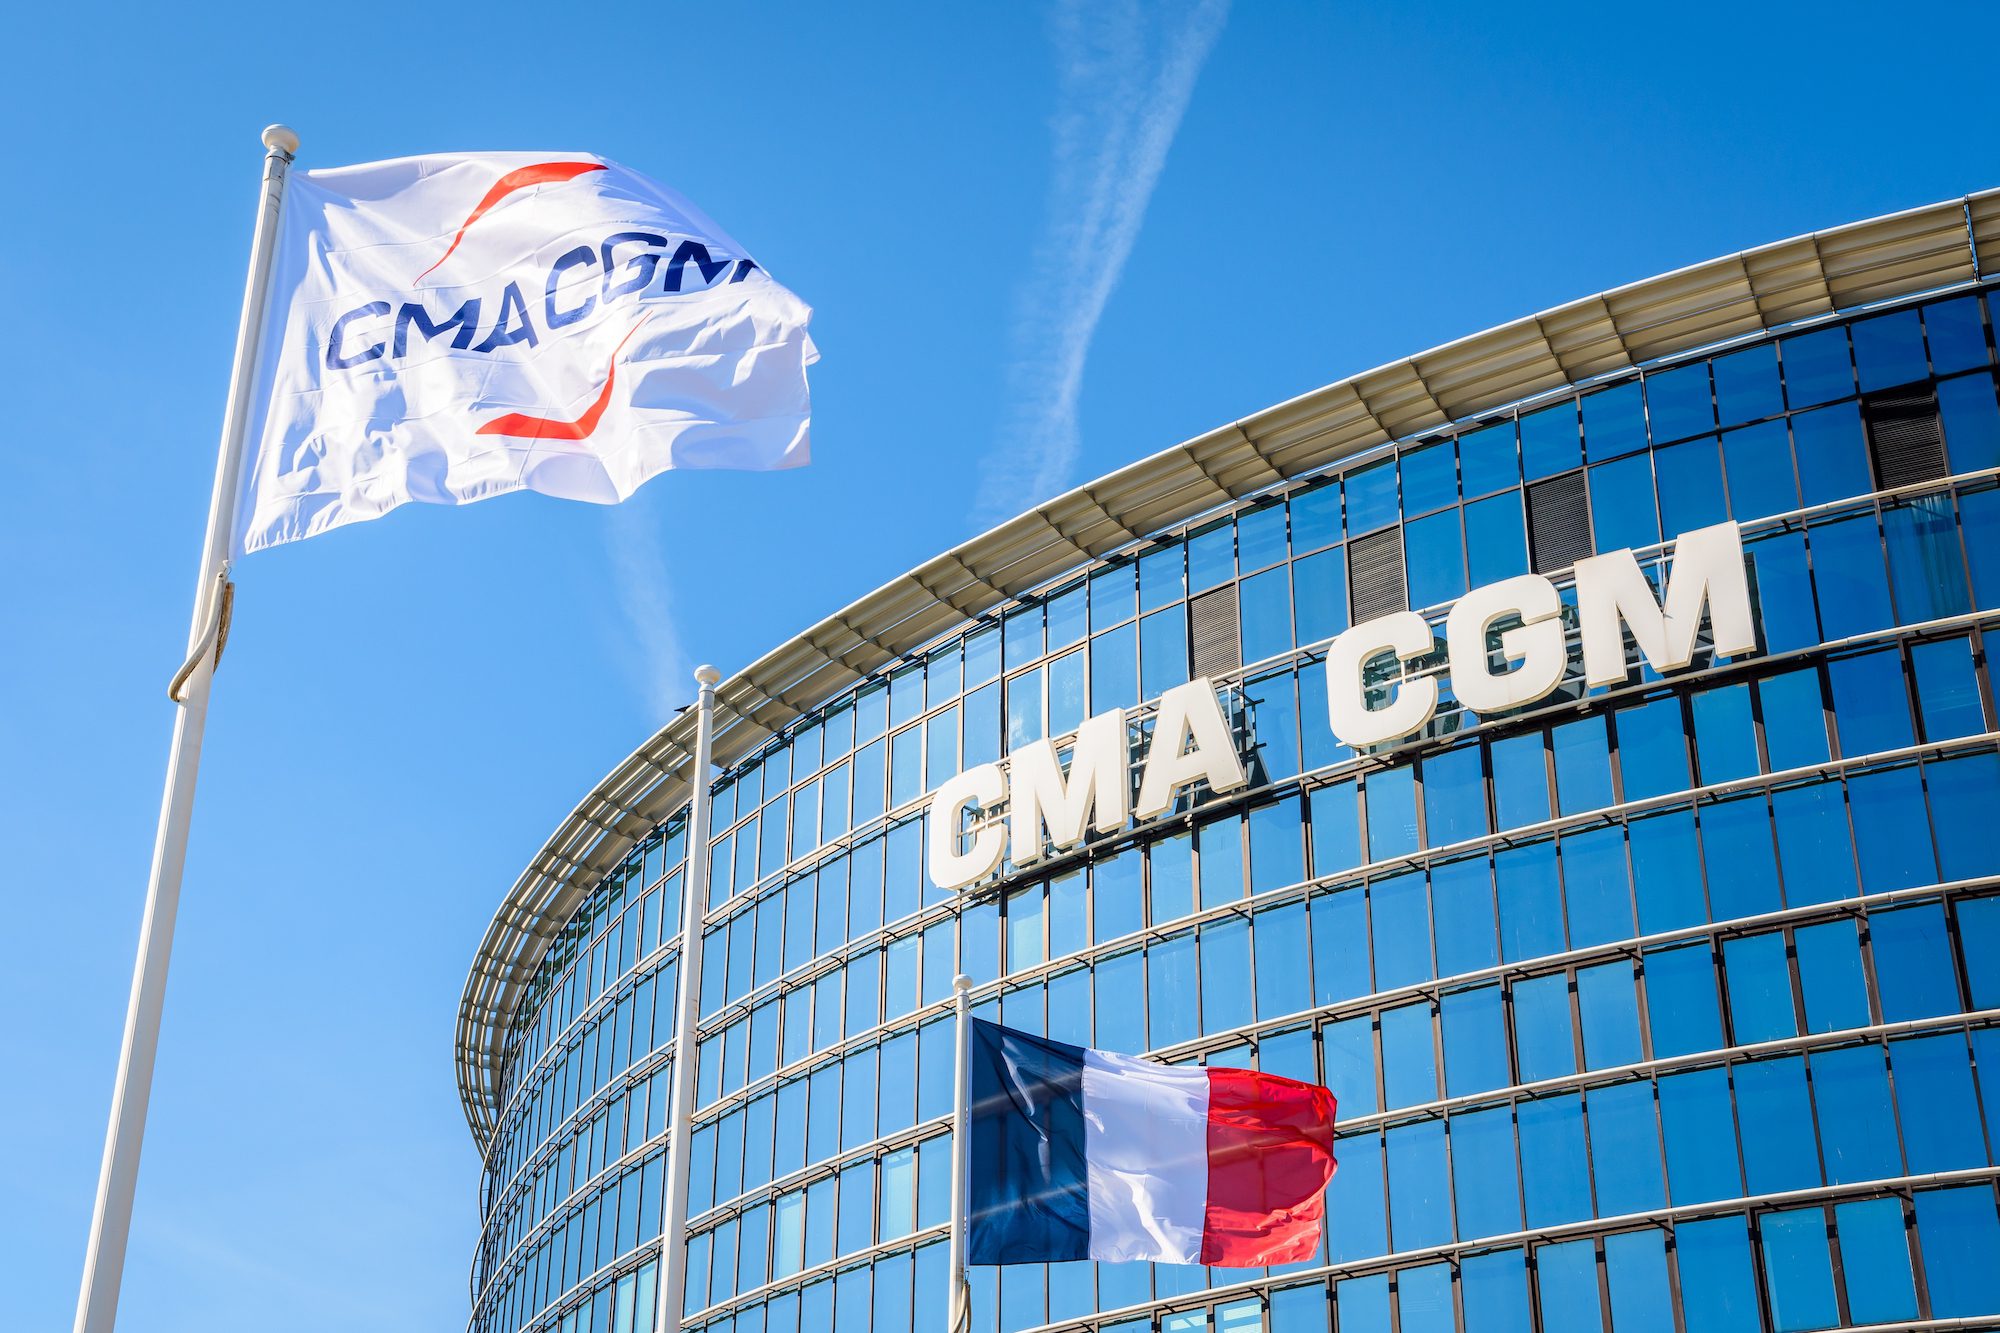 cma cgm headquaters and logo with French flag